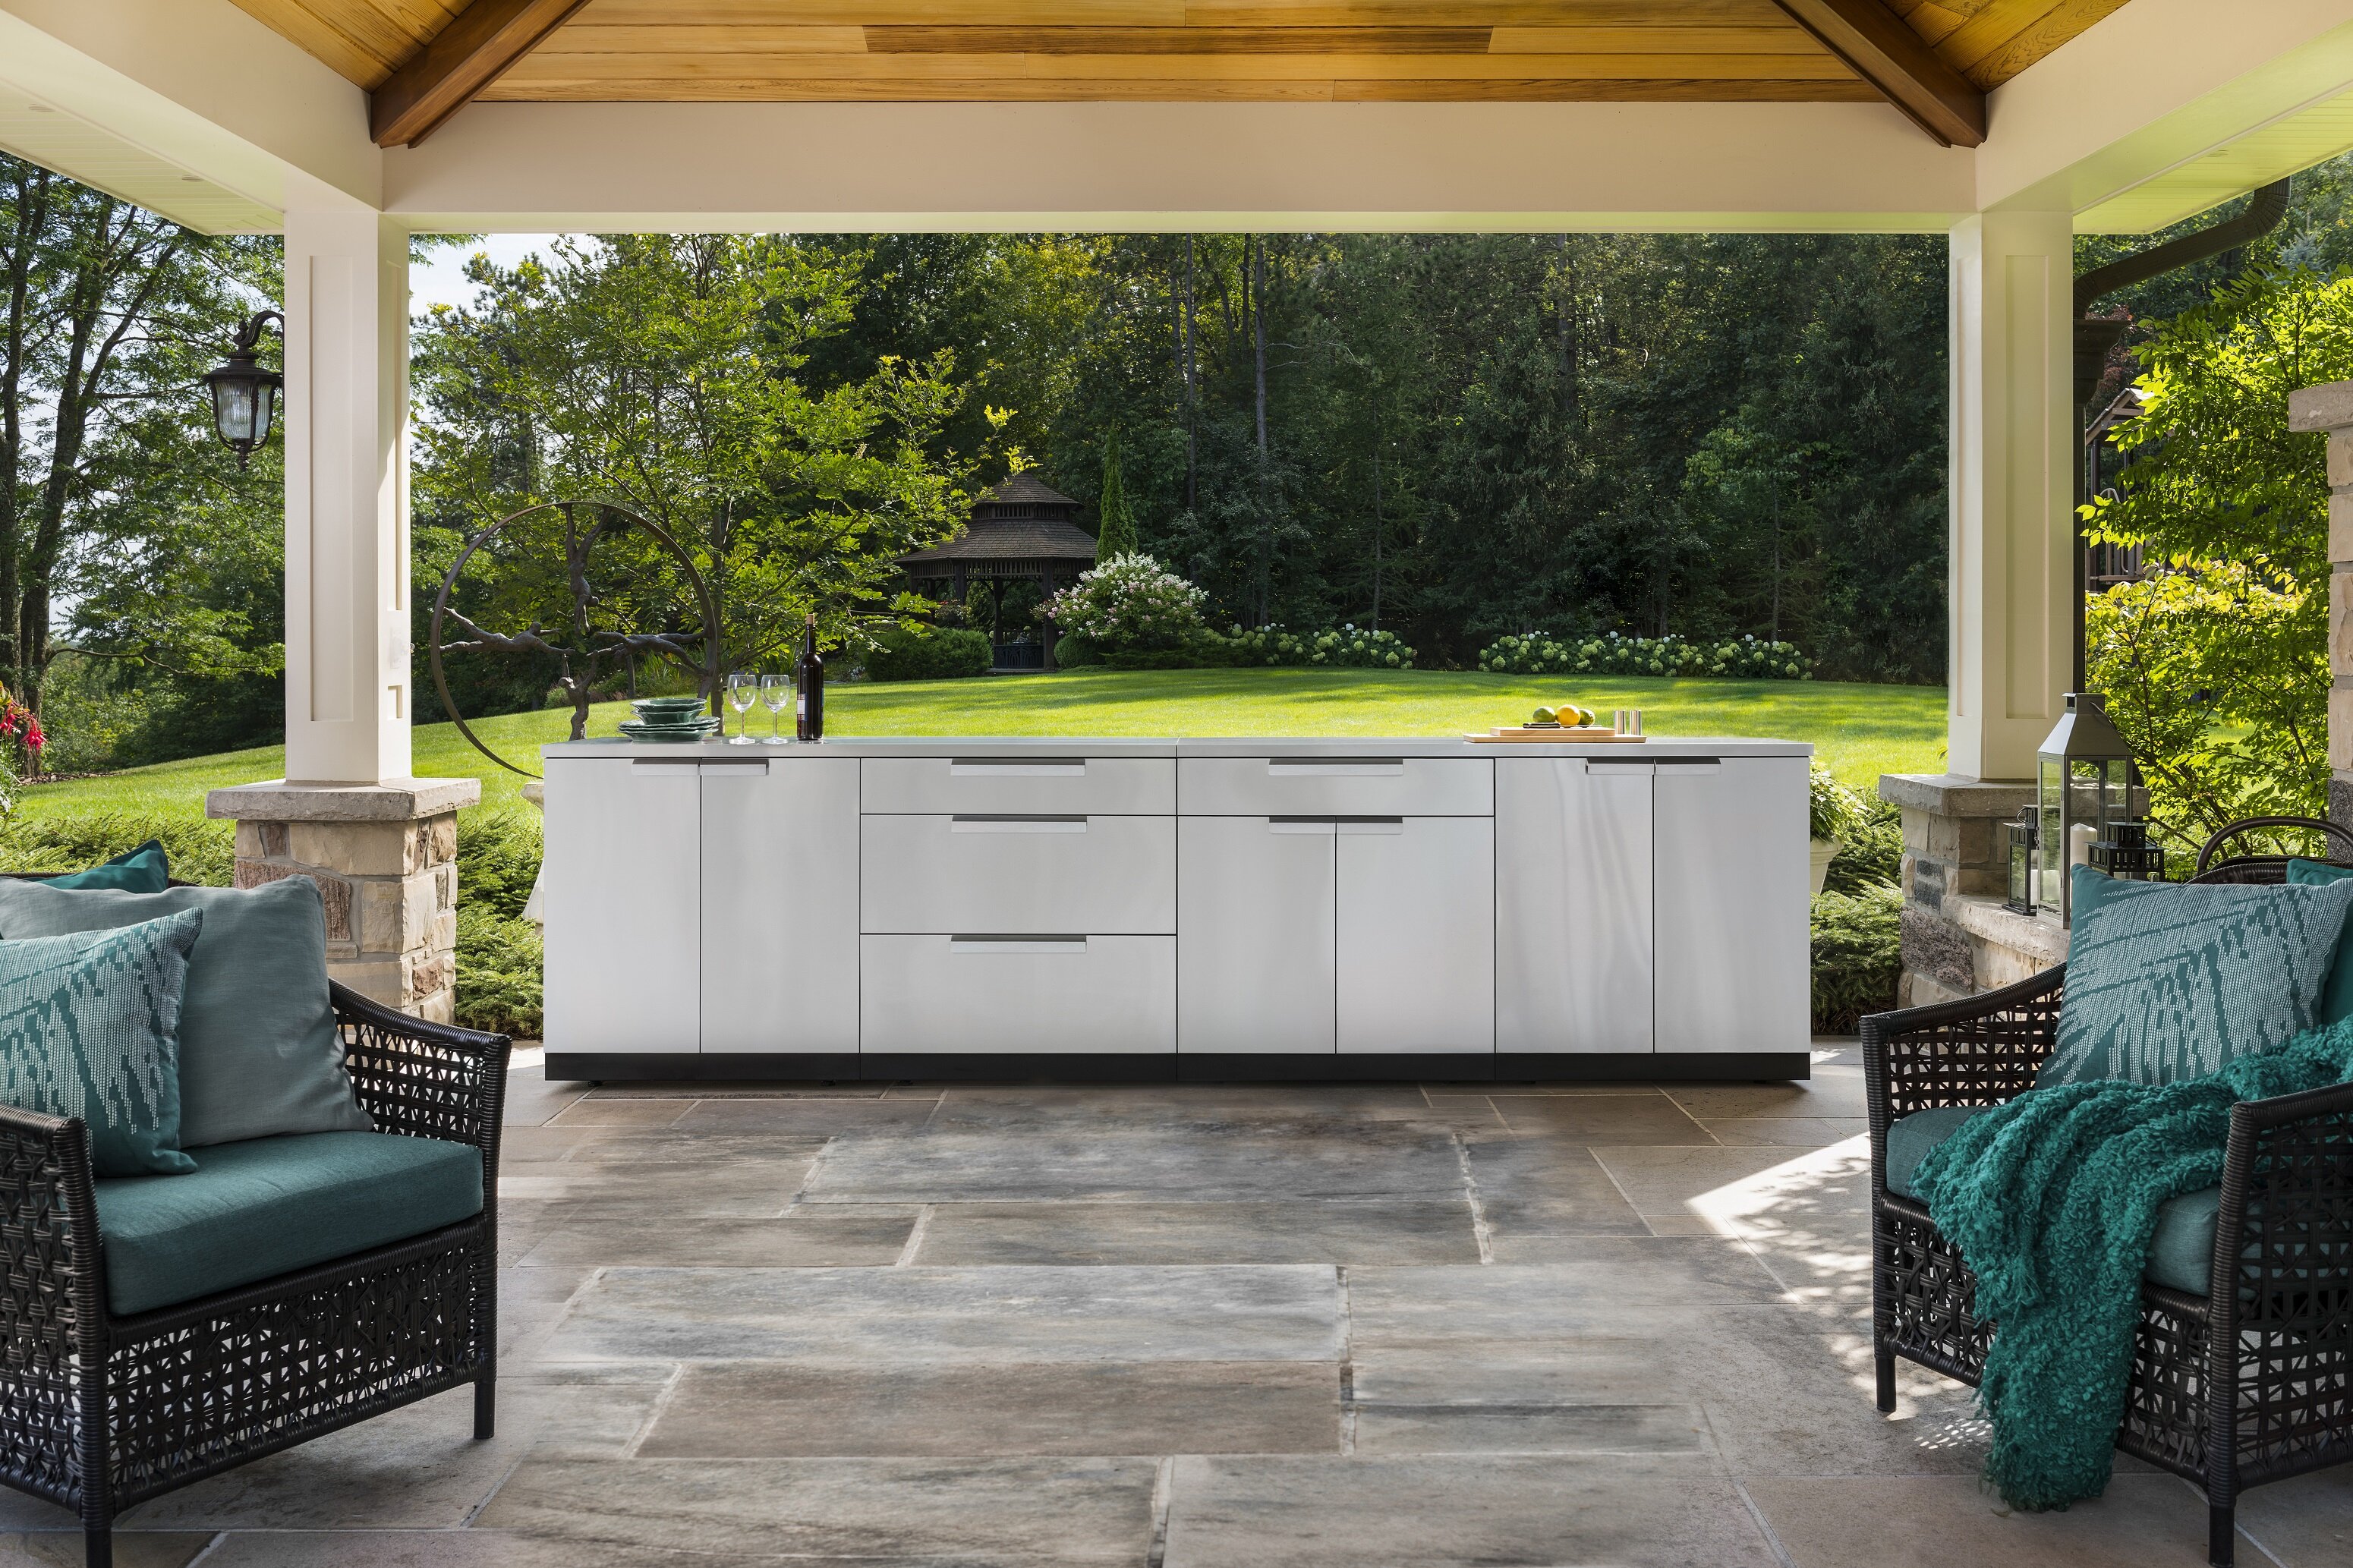 Portable Outdoor Kitchen Design For Greenwich Country Club